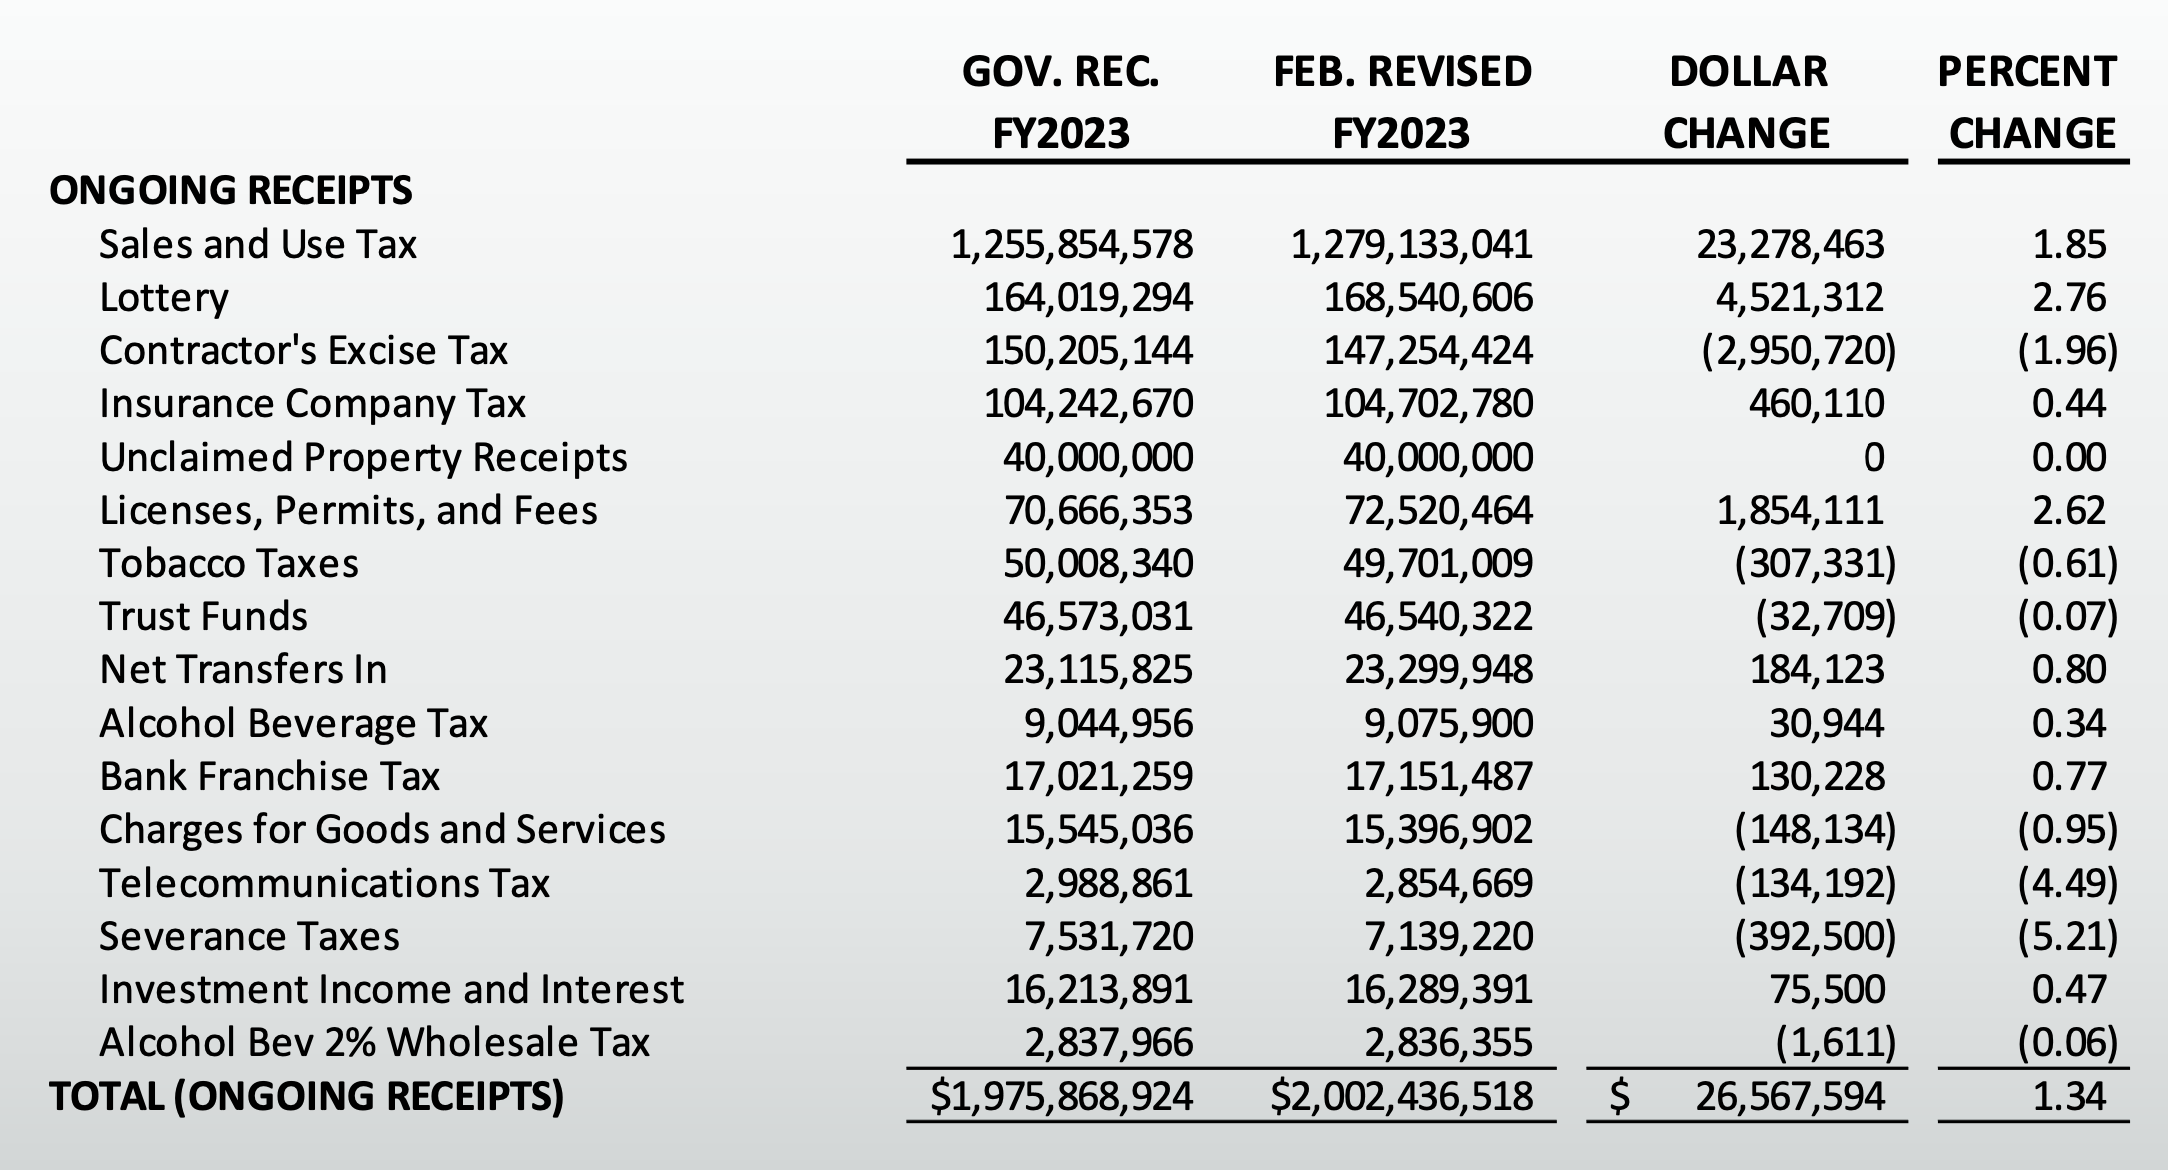 BFM, revised revenue projections for FY2023 vs. Governor's earlier recommendation, presentation to Joint Appropriations, 2022.02.14.